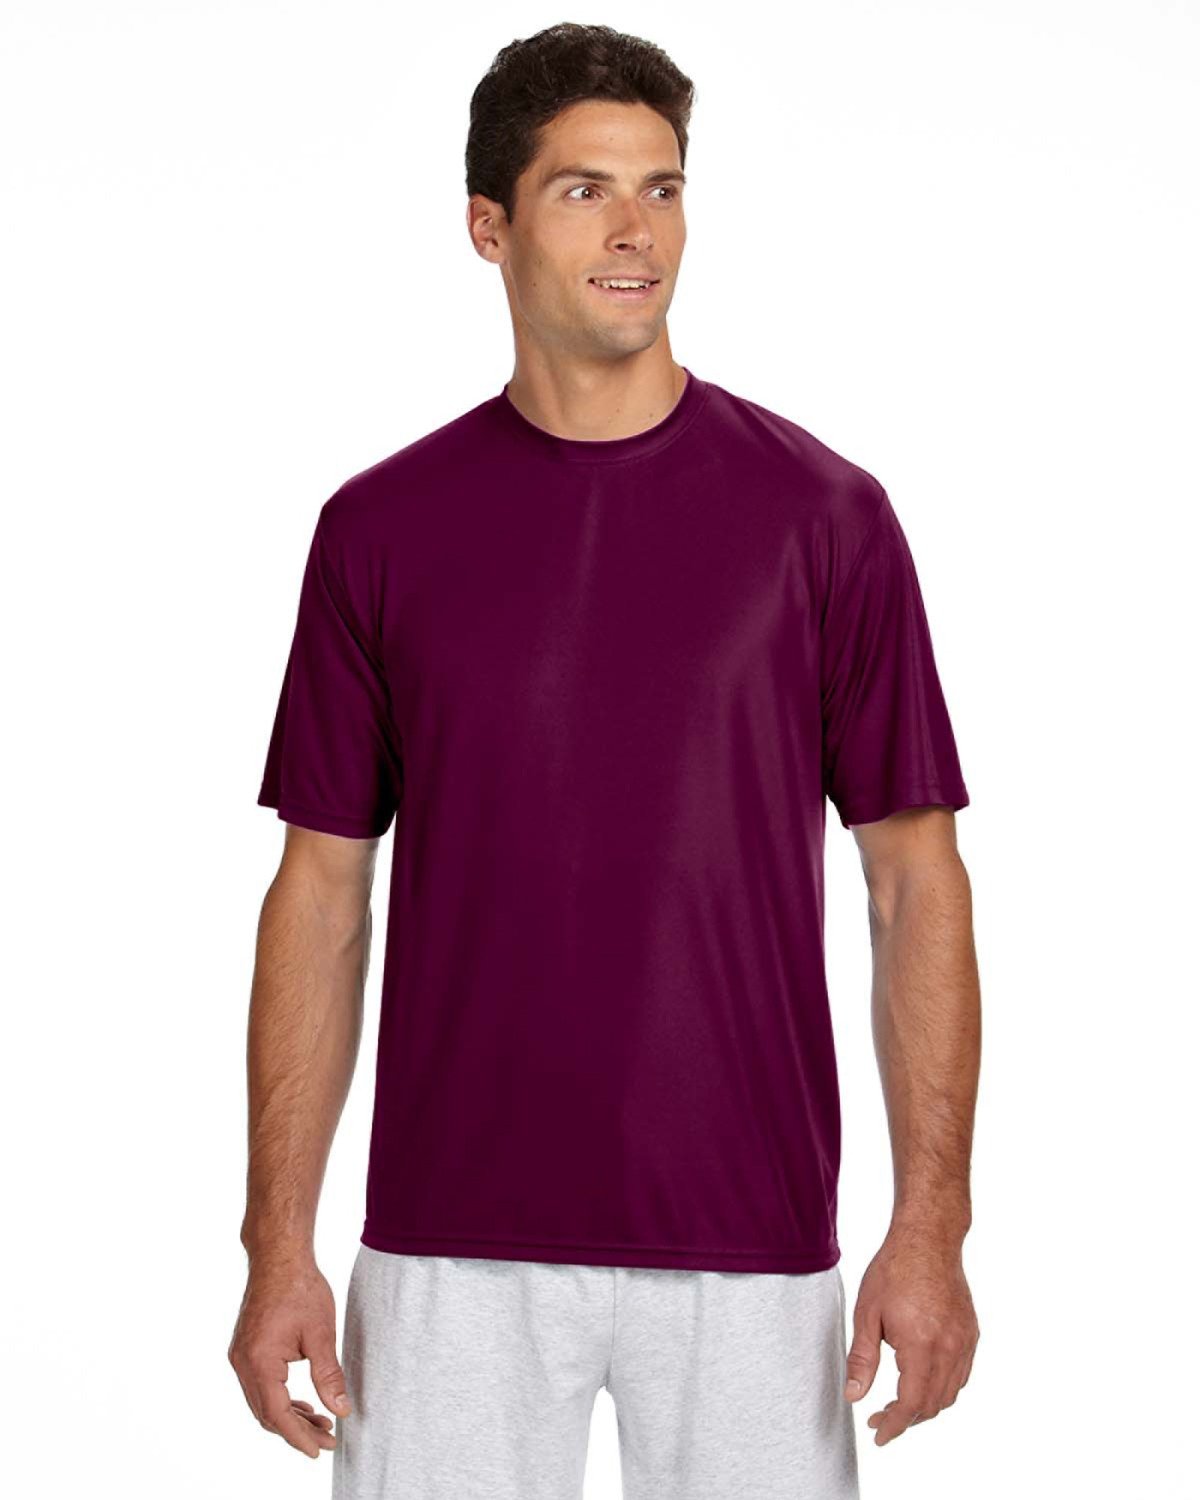 A4 Men's Cooling Performance T-Shirt, Maroon, Small